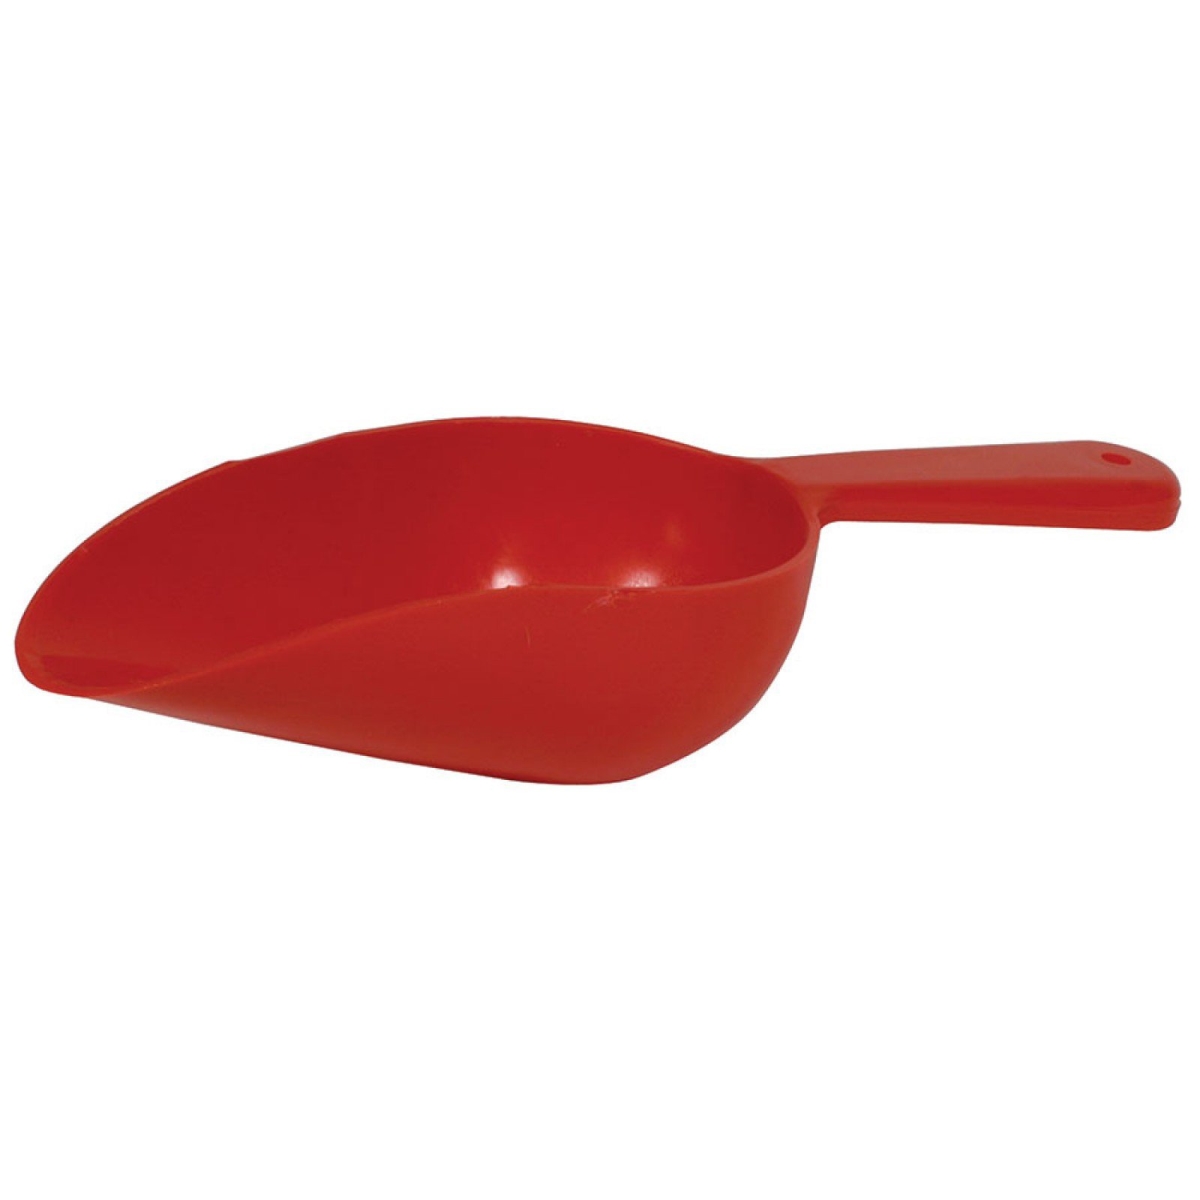 Picture of Frontier 19205 4 in. Red Plastic Scoop Bowl